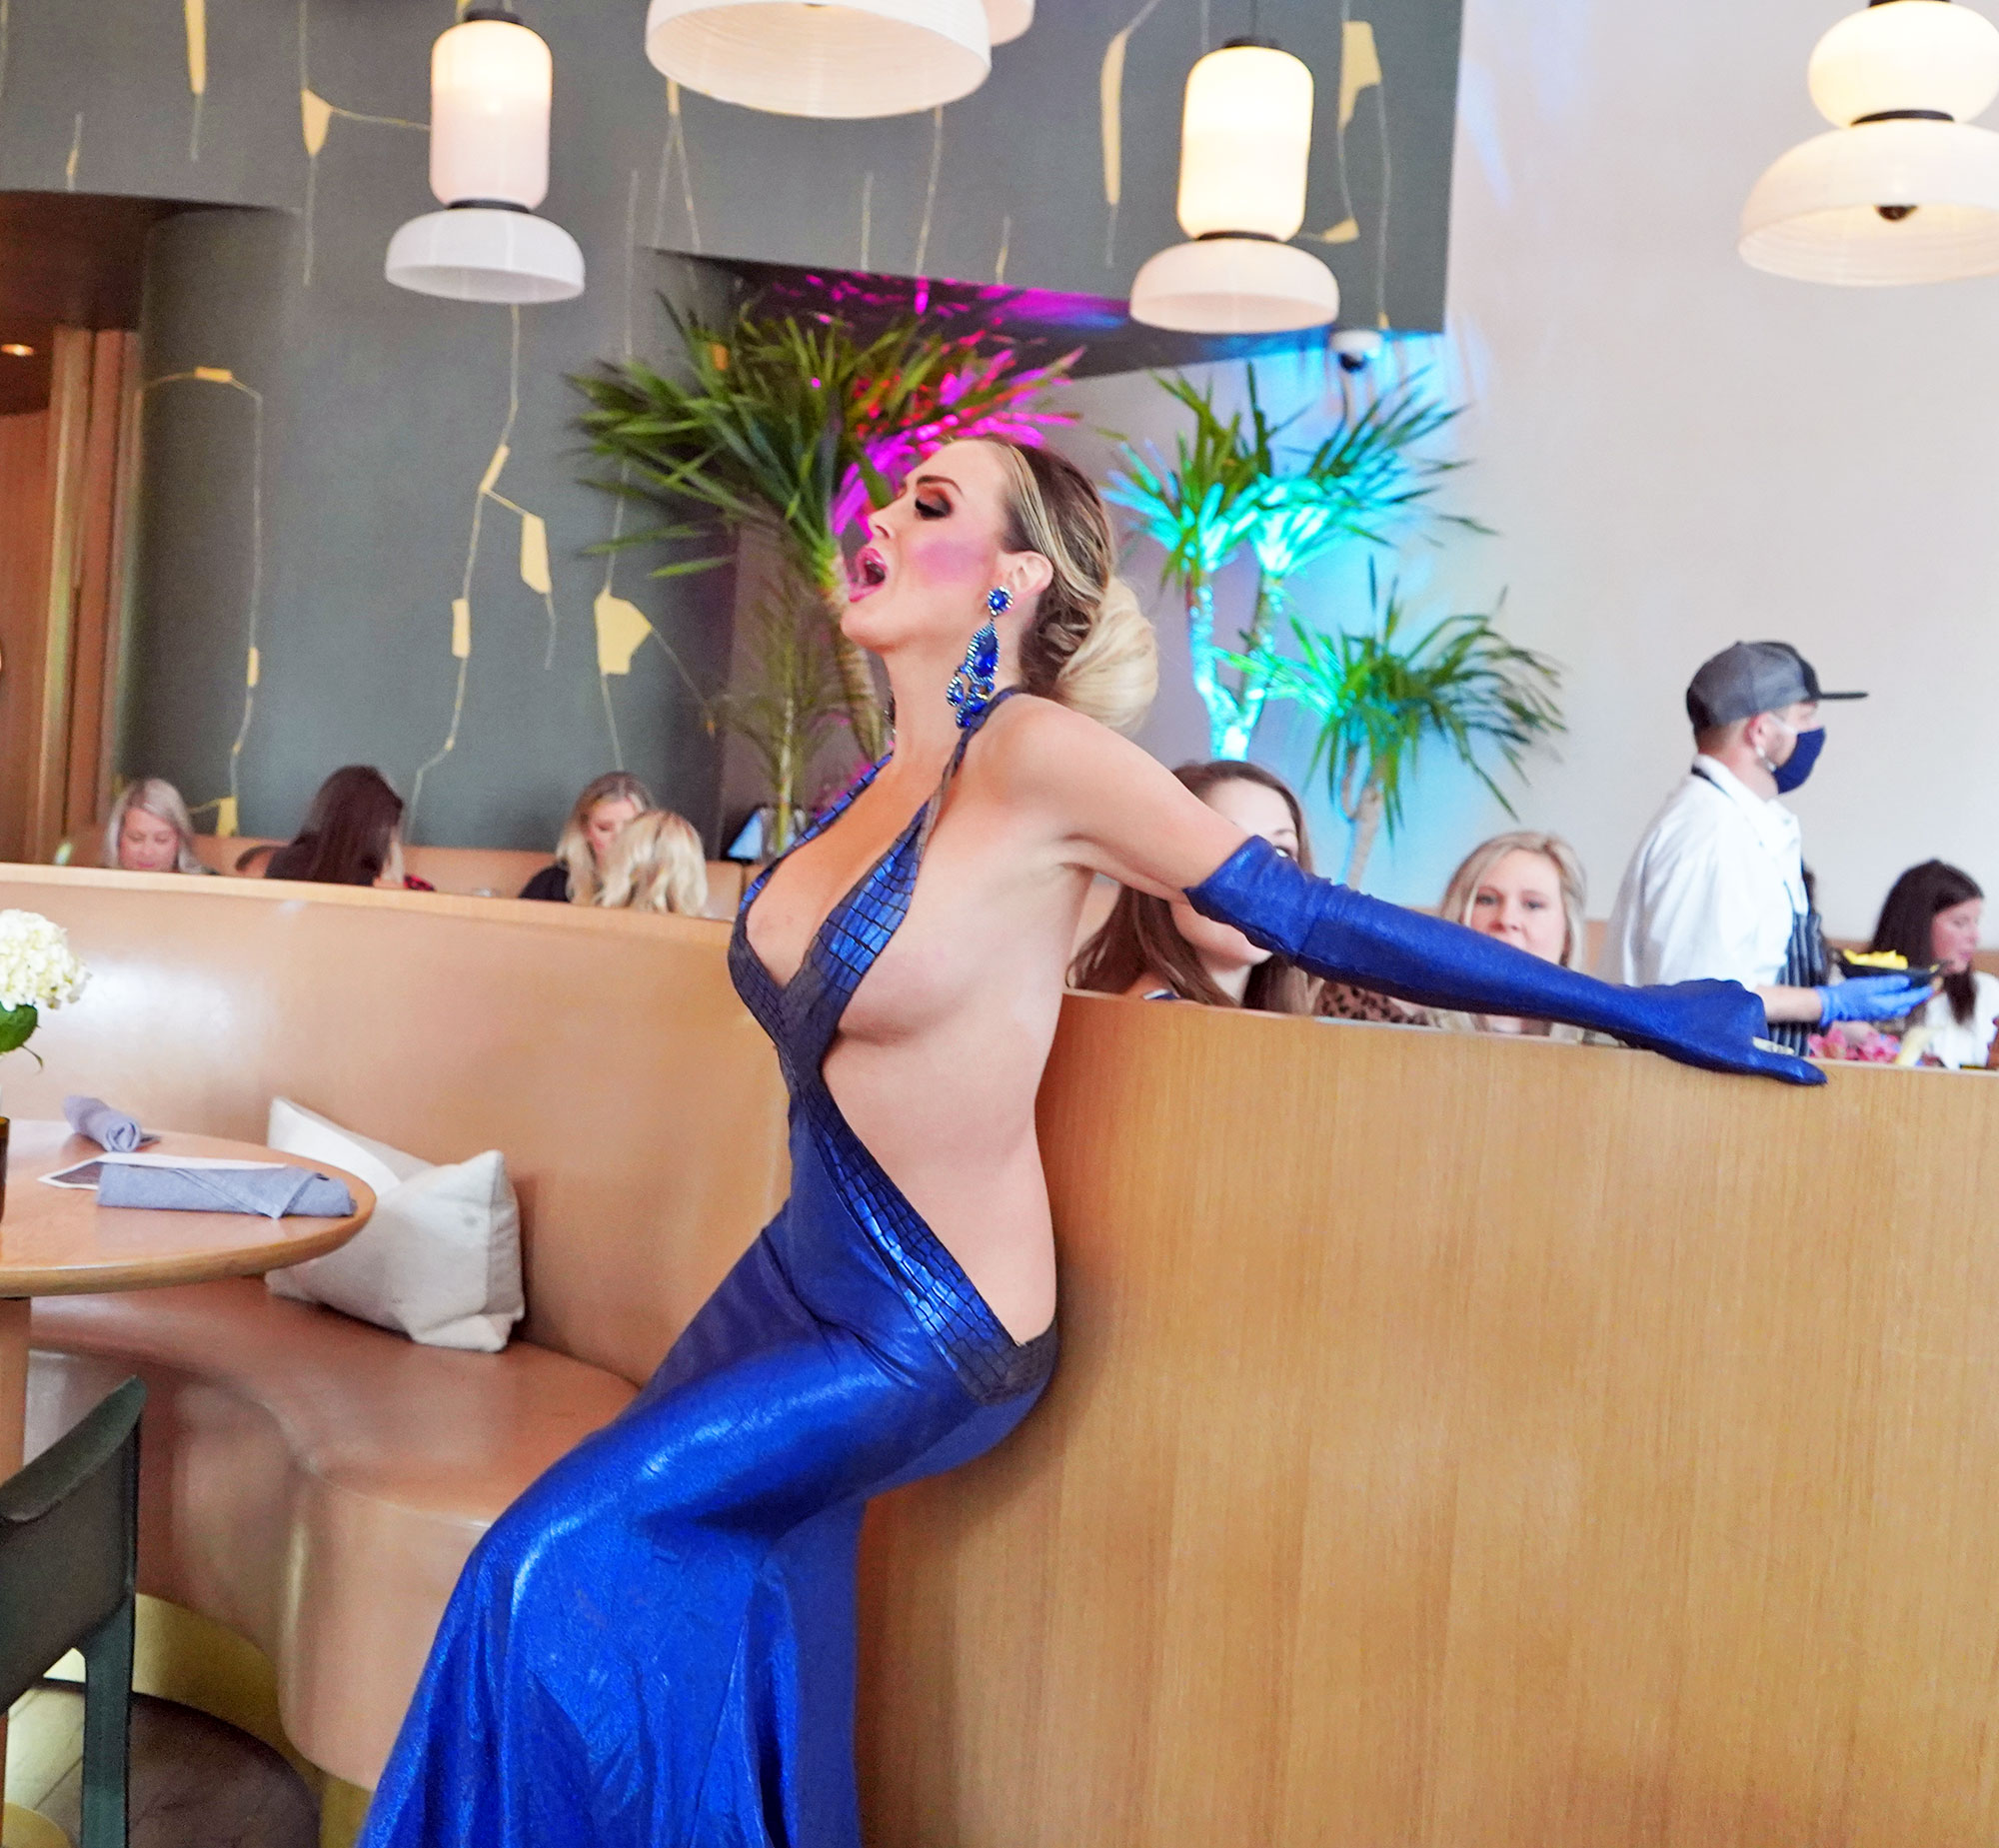 Krystal Summers performing at Commons Club drag queen brunch in the Design District.